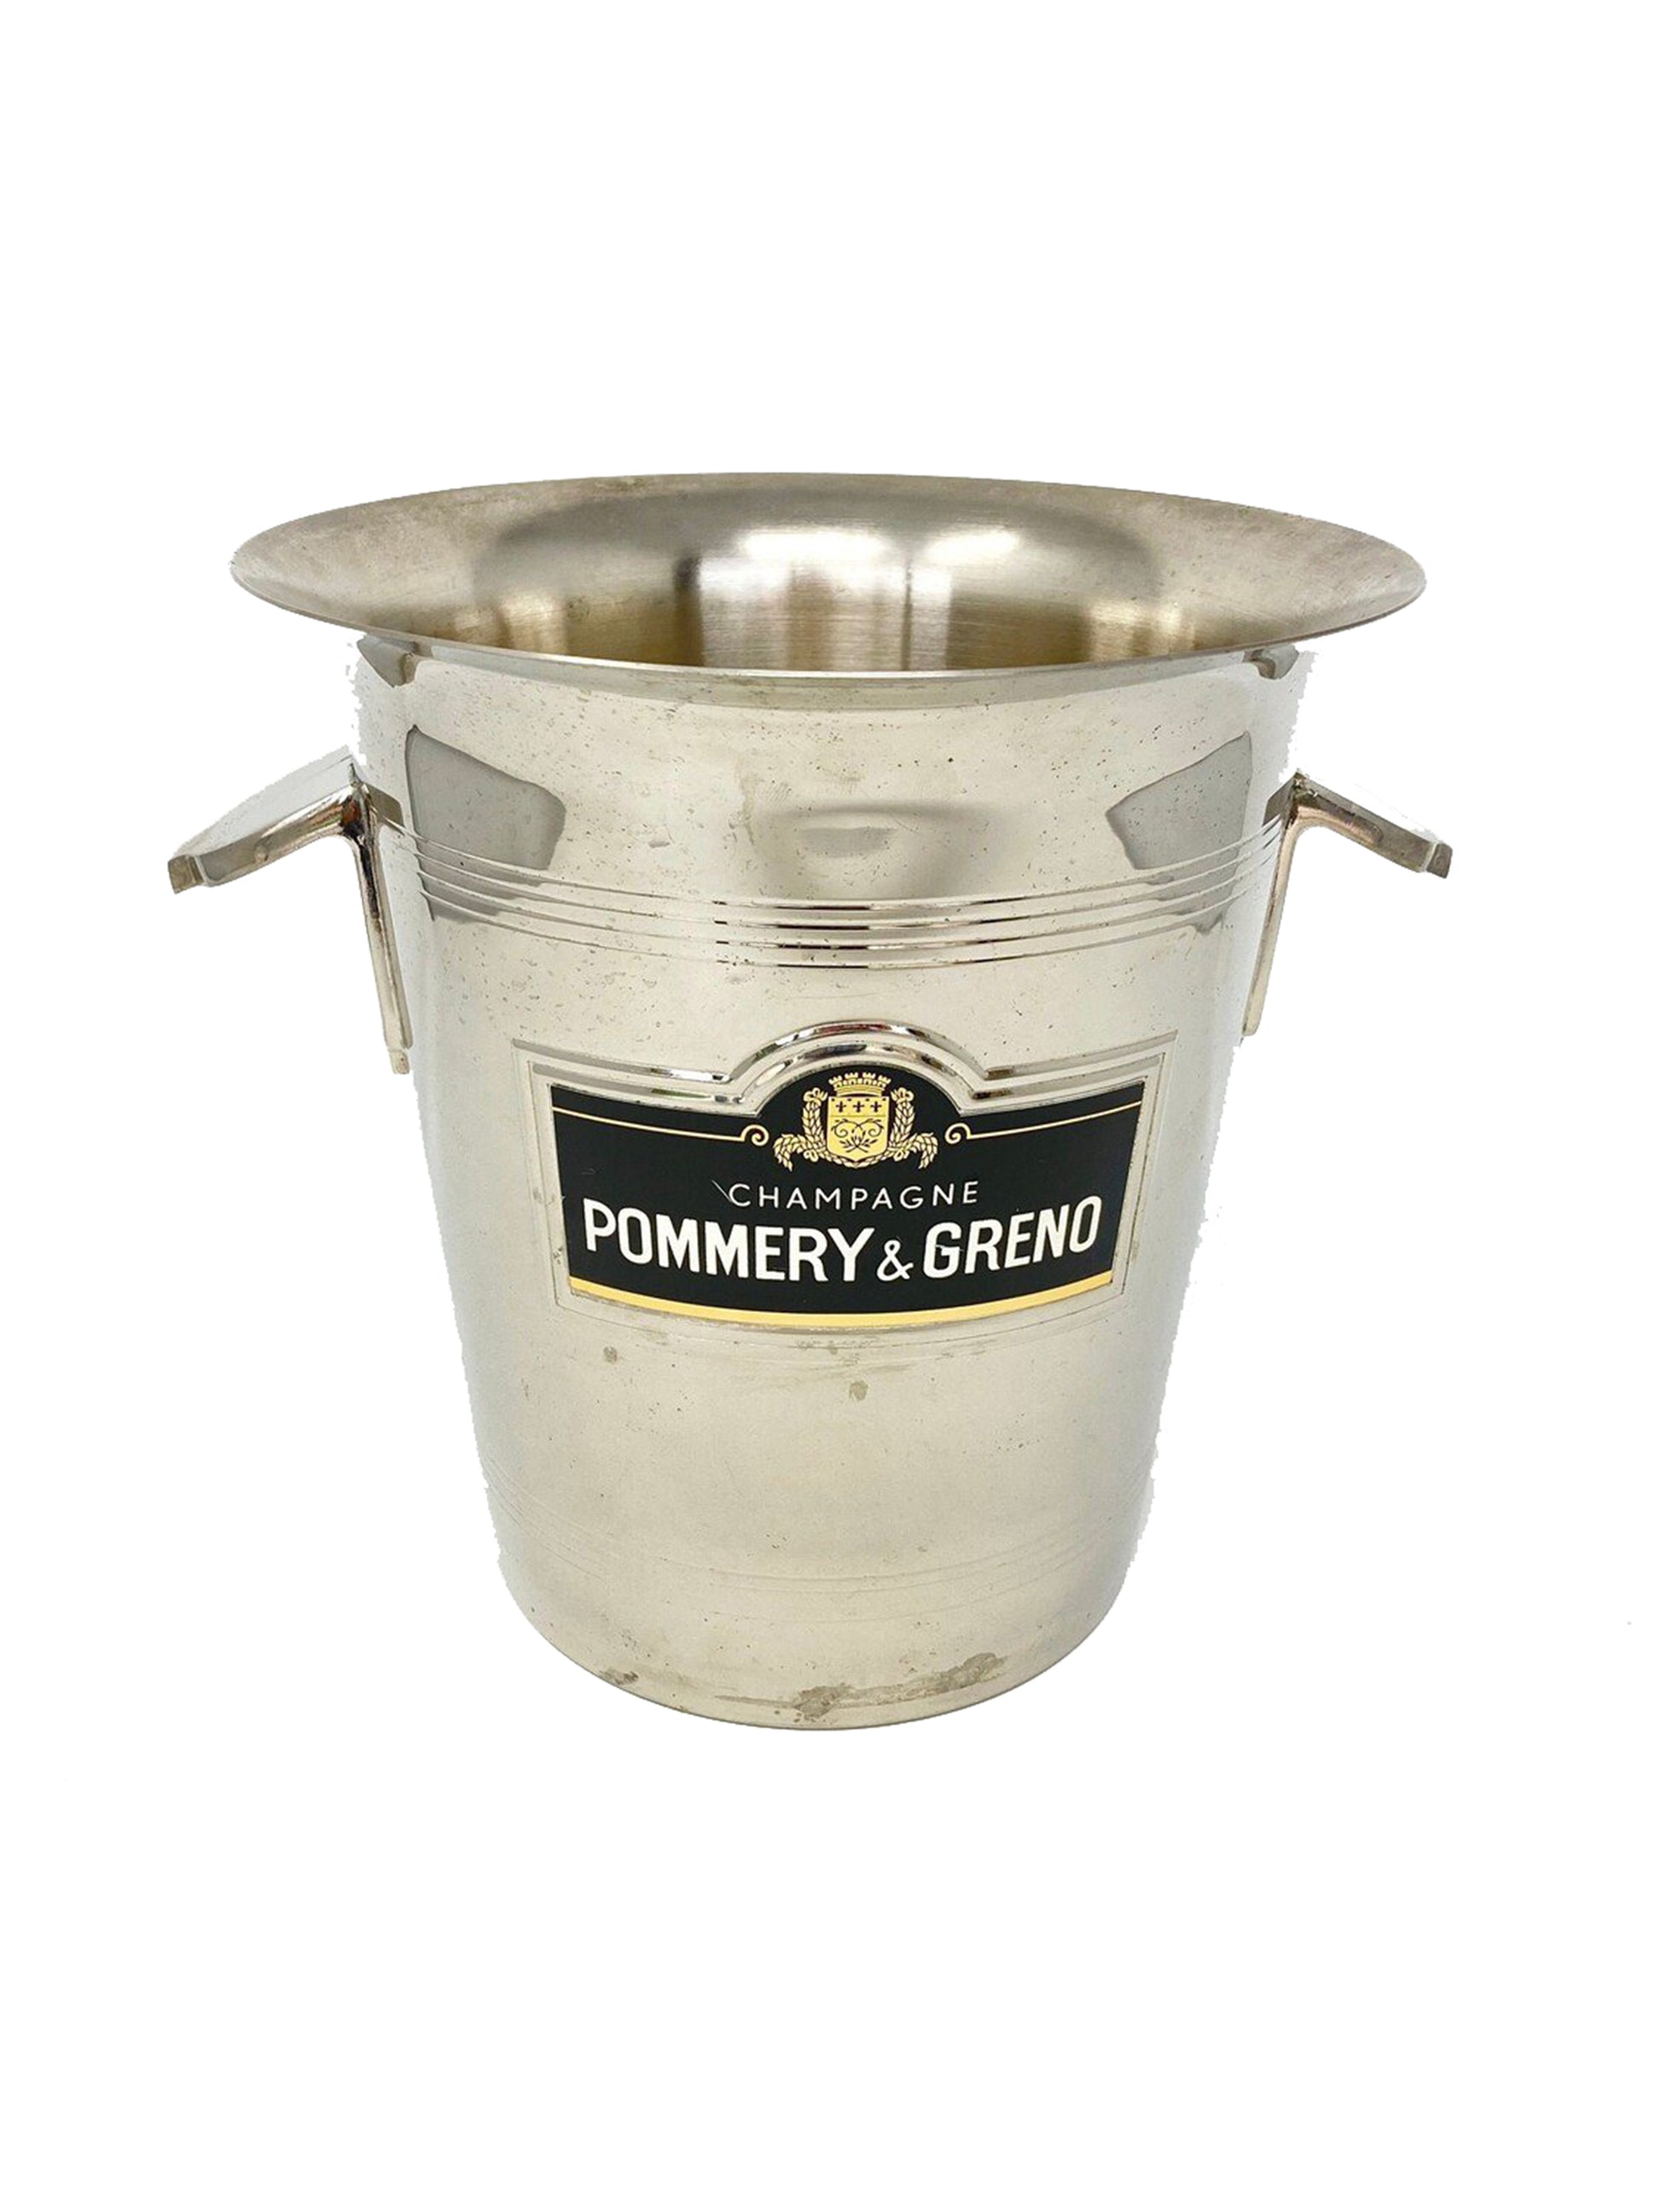 Vintage Pommery and Greno Champagne Bucket Weston Table